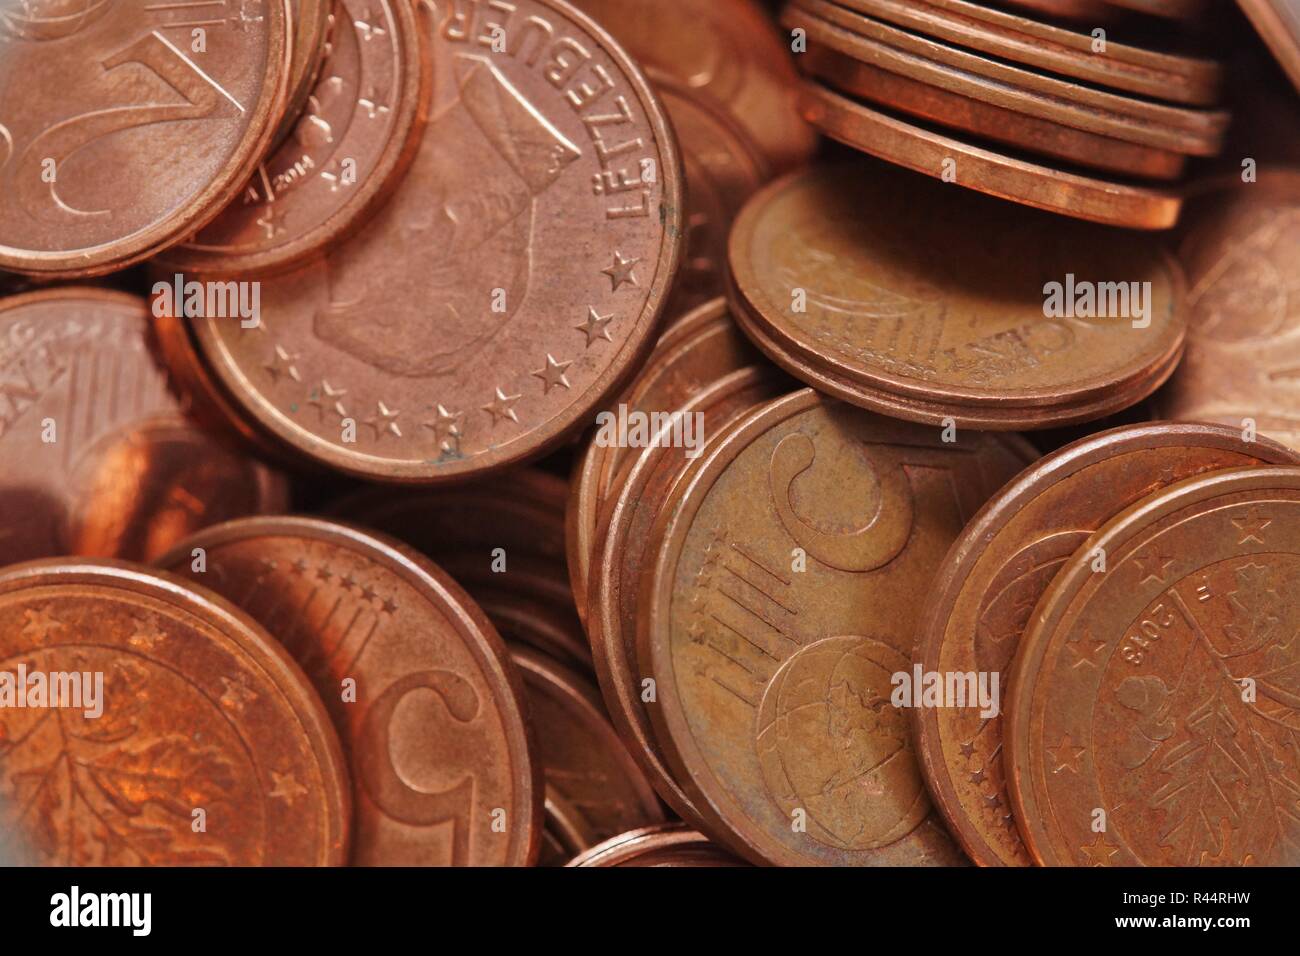 multiple currencies lying on a table Stock Photo